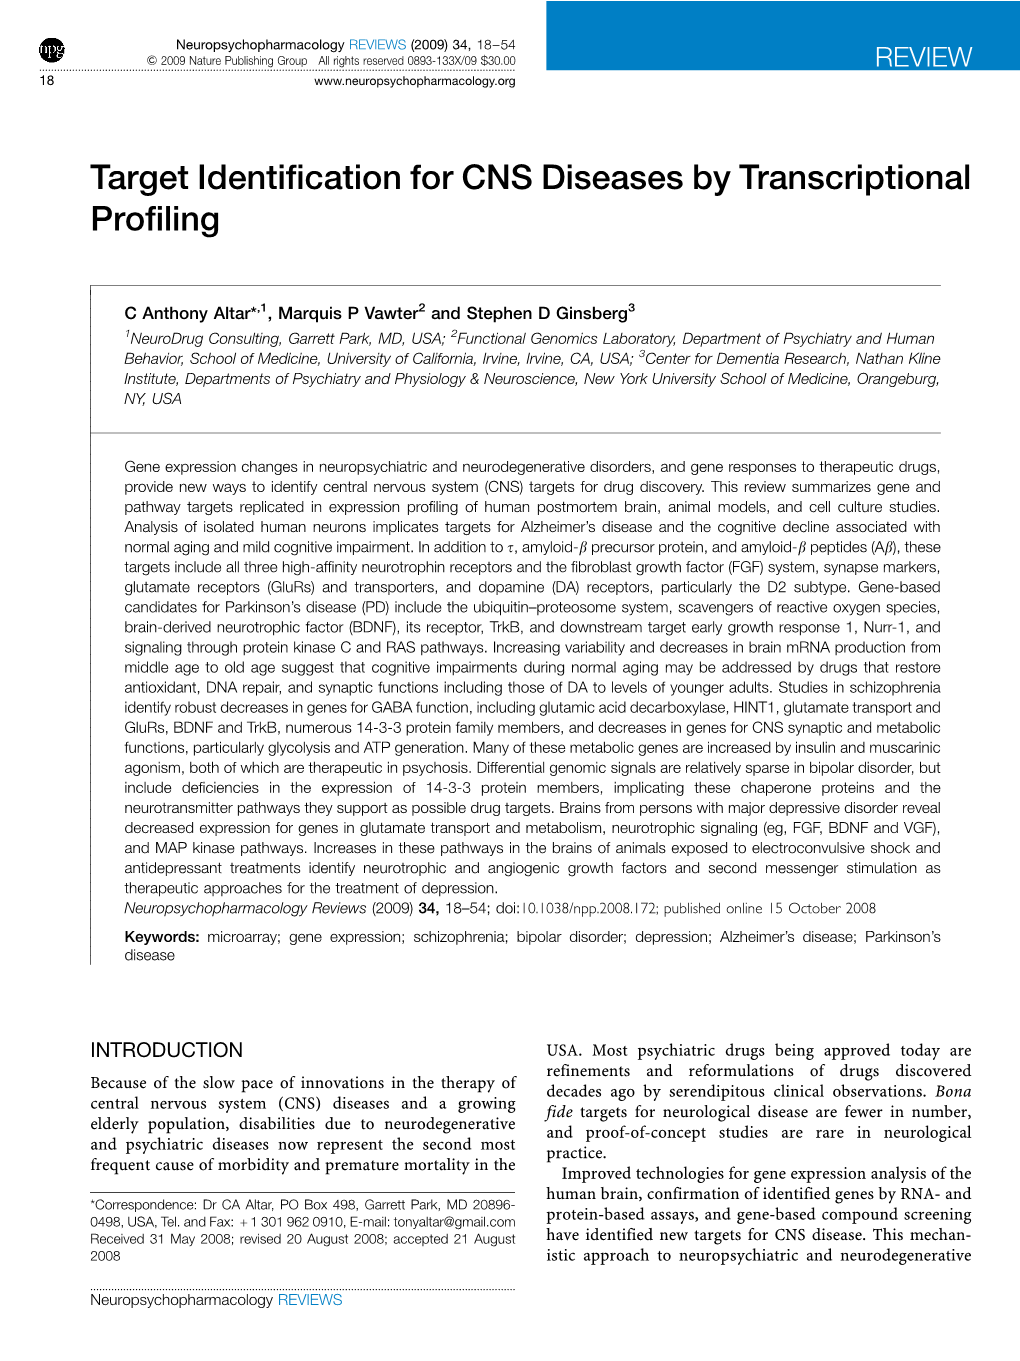 Target Identification for CNS Diseases by Transcriptional Profiling